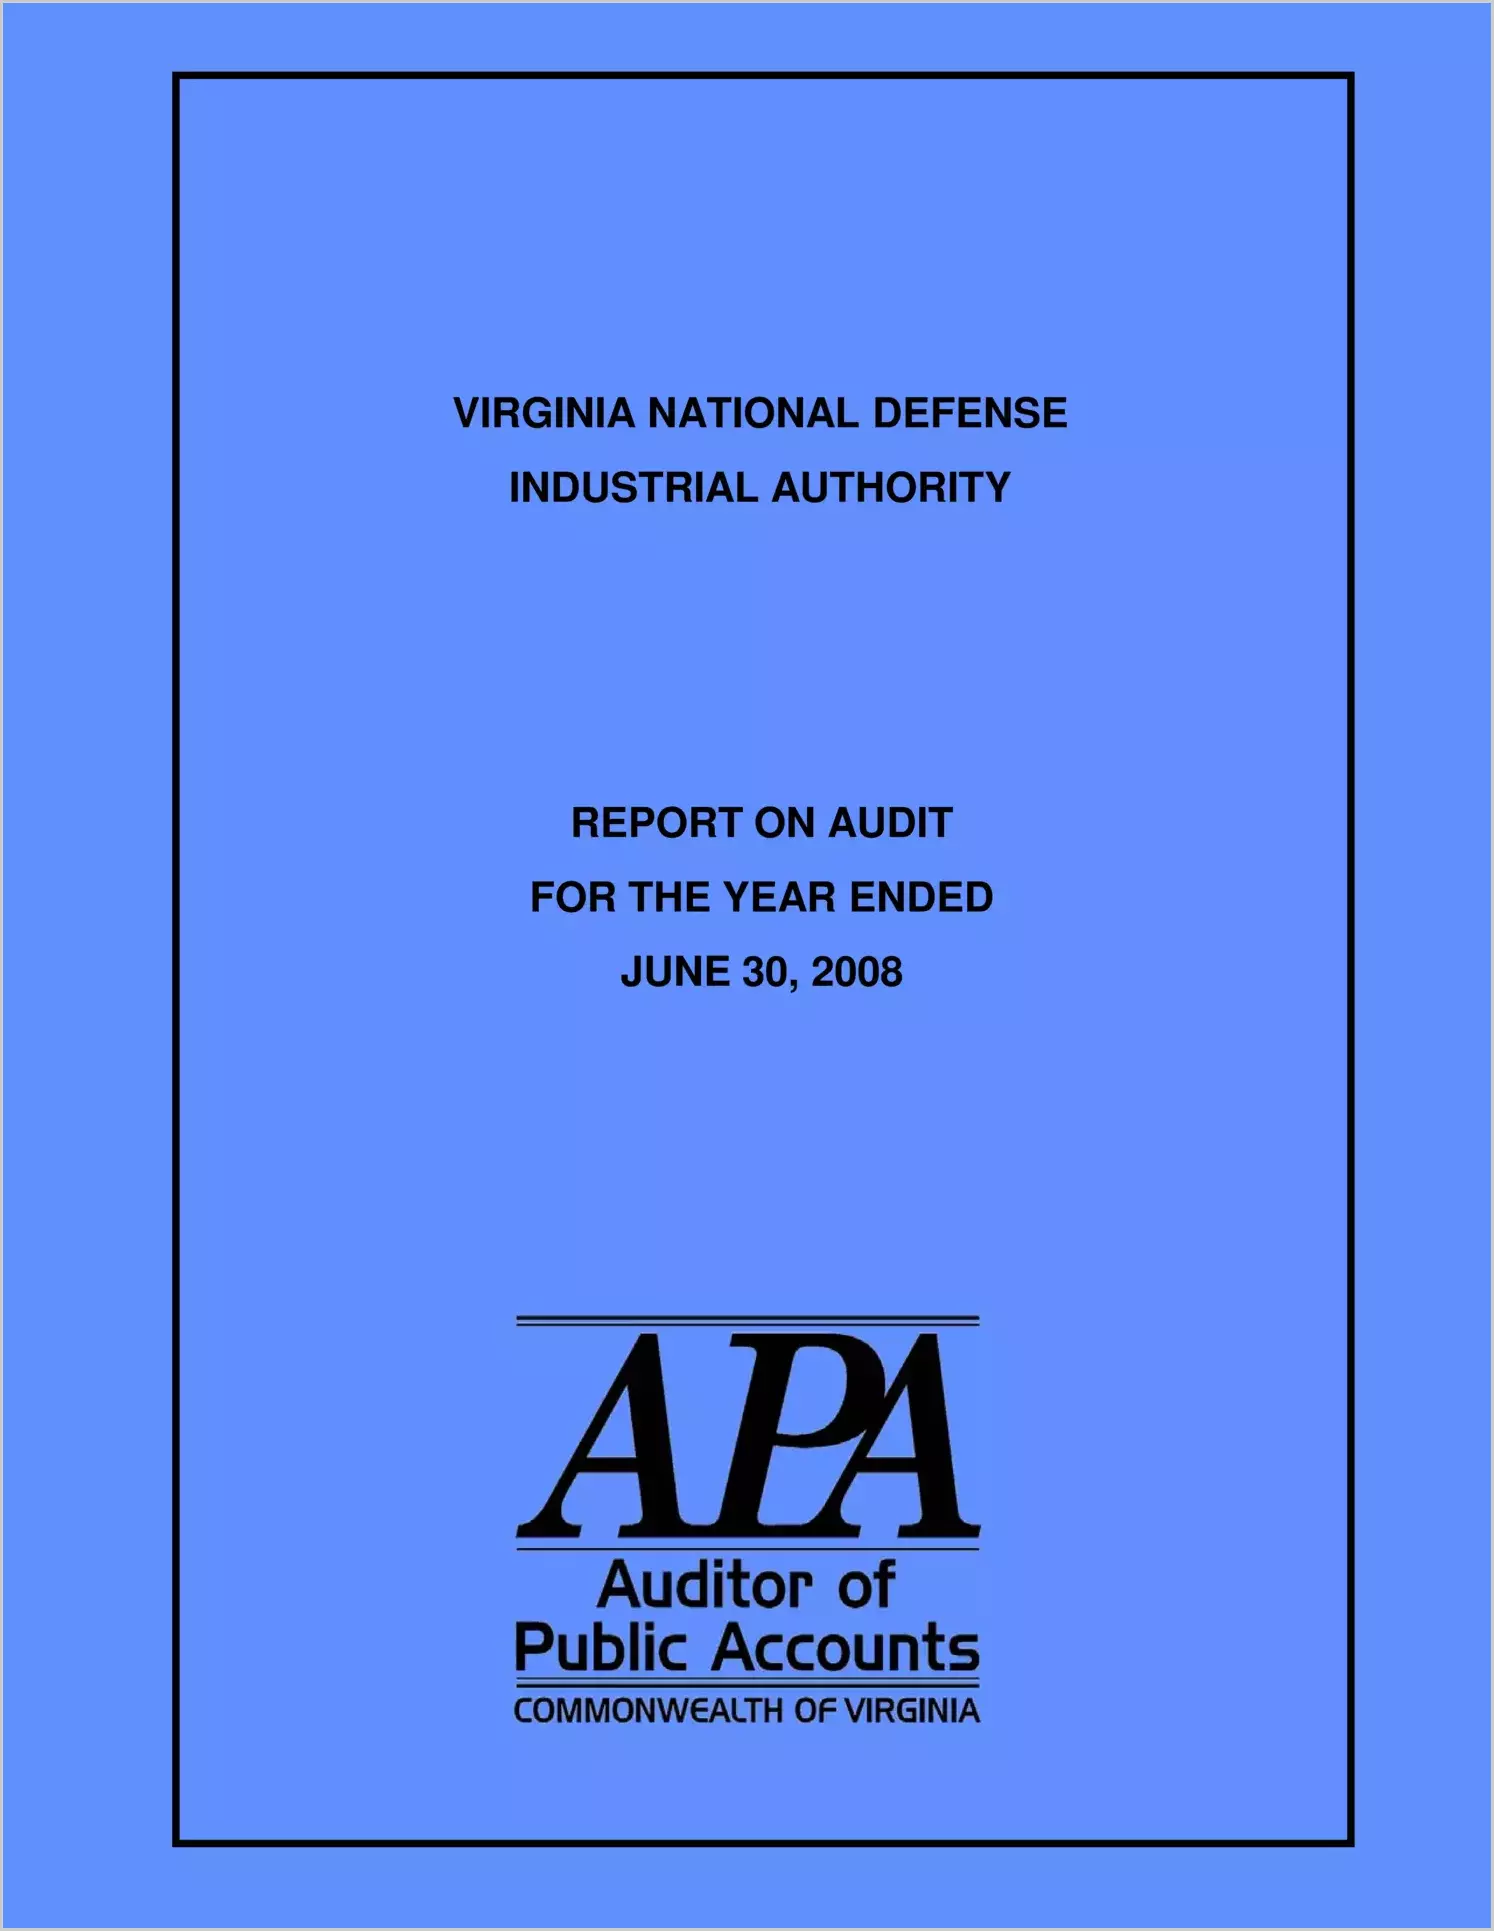 Virginia National Defense Industrial Authority Report on Audit for the year ending June 30, 2008